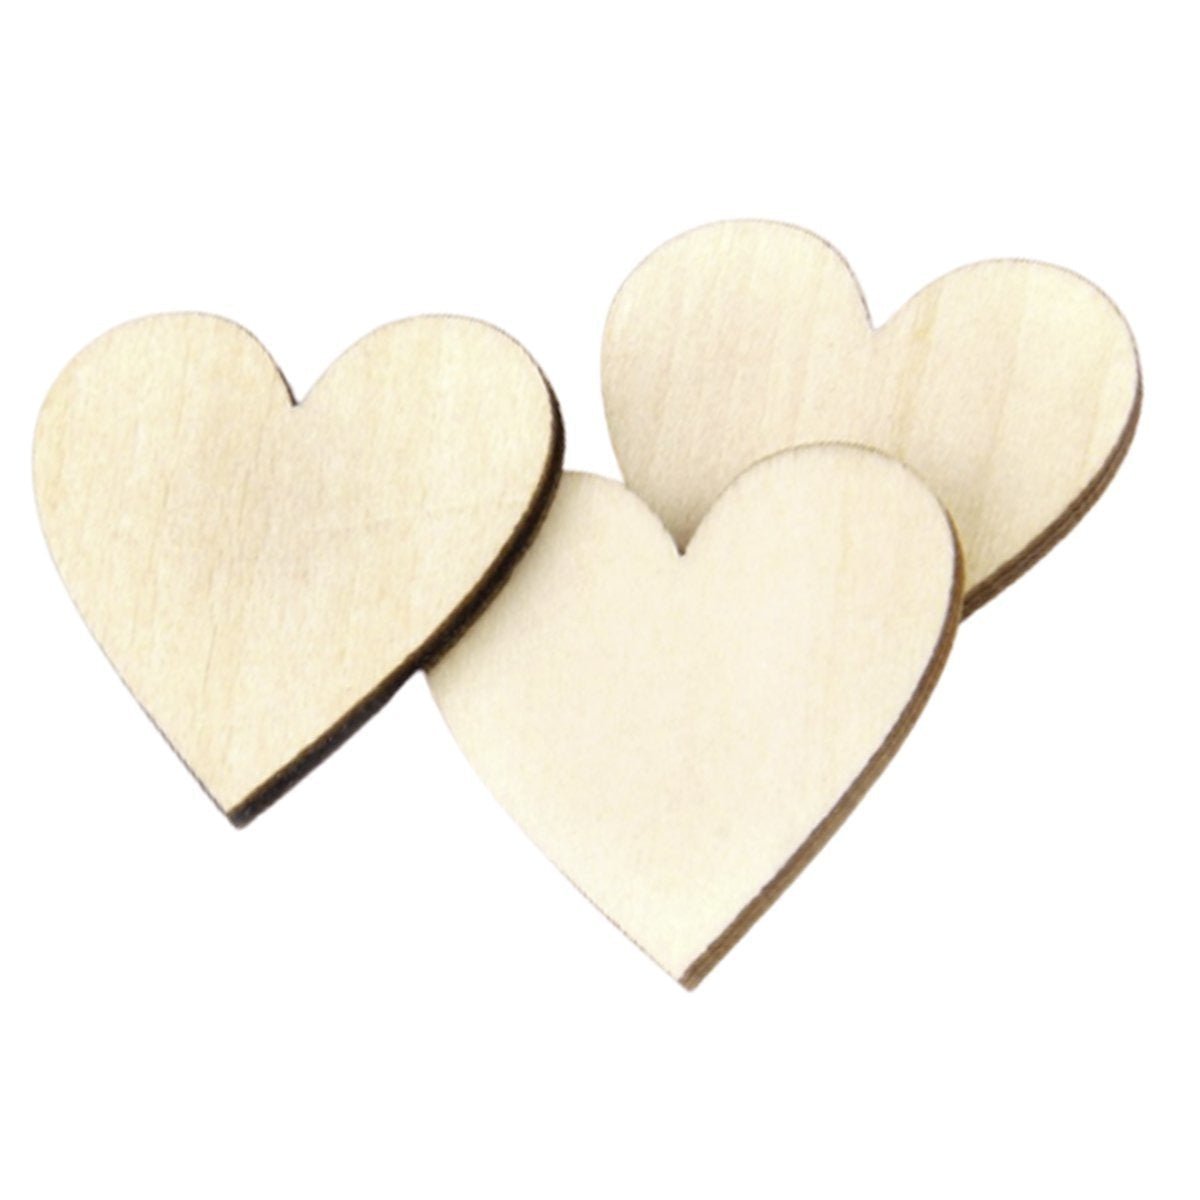 100pcs 40mm Wooden Love Hearts DIY Craft Wood Scrapbooking - Asia Sell